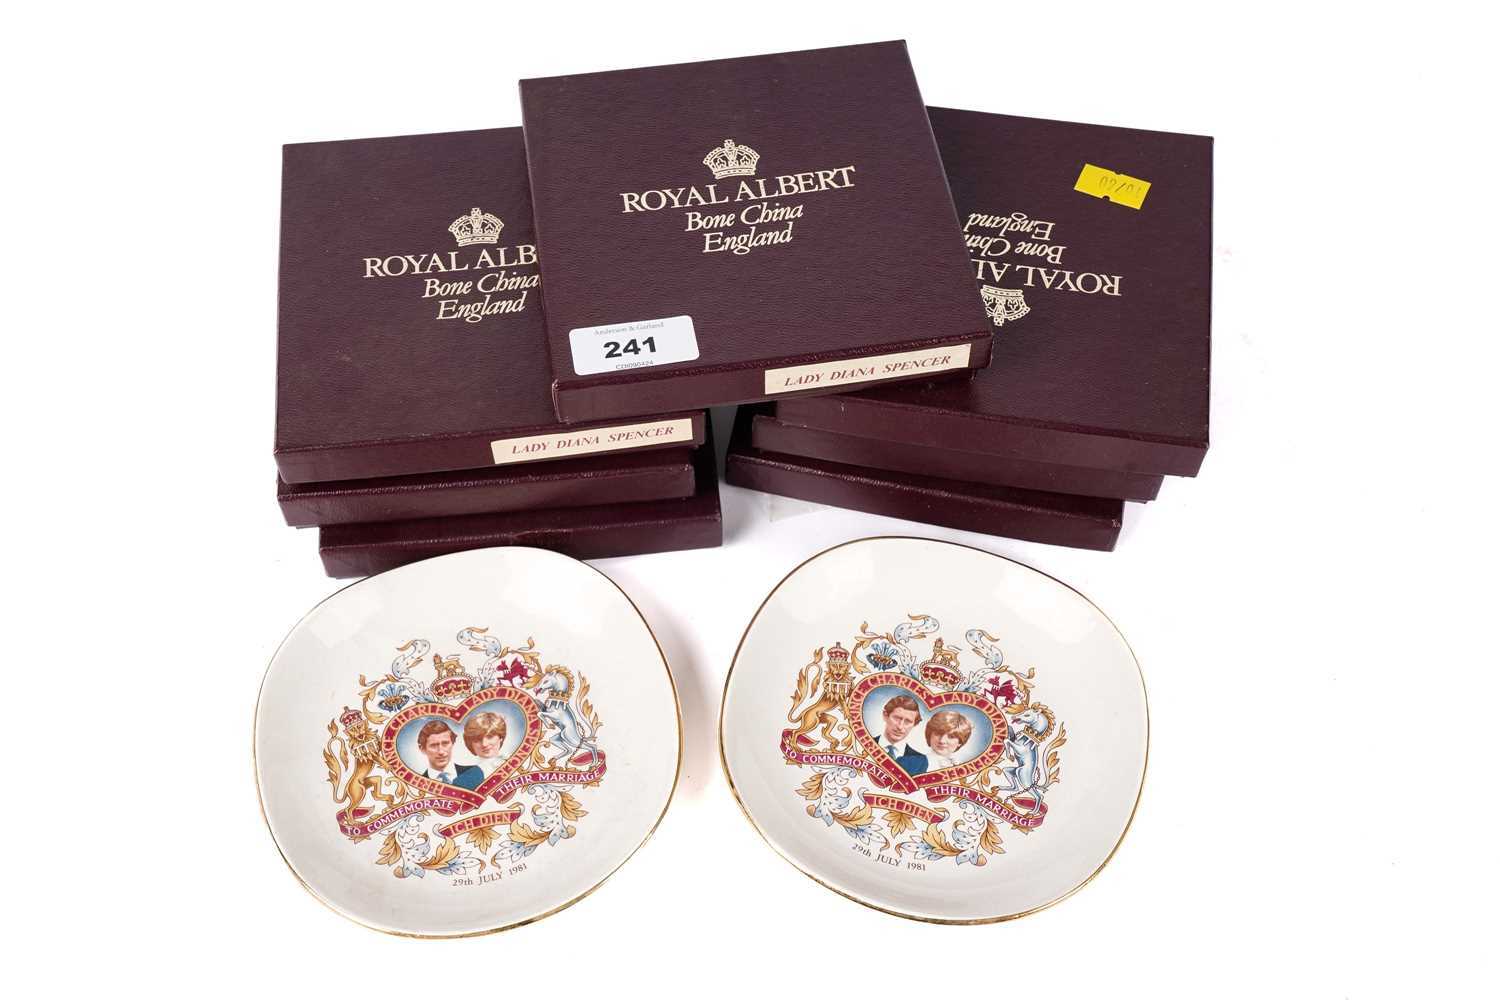 A collection of Royal Albert Lady Diana Spencer commemorative plates